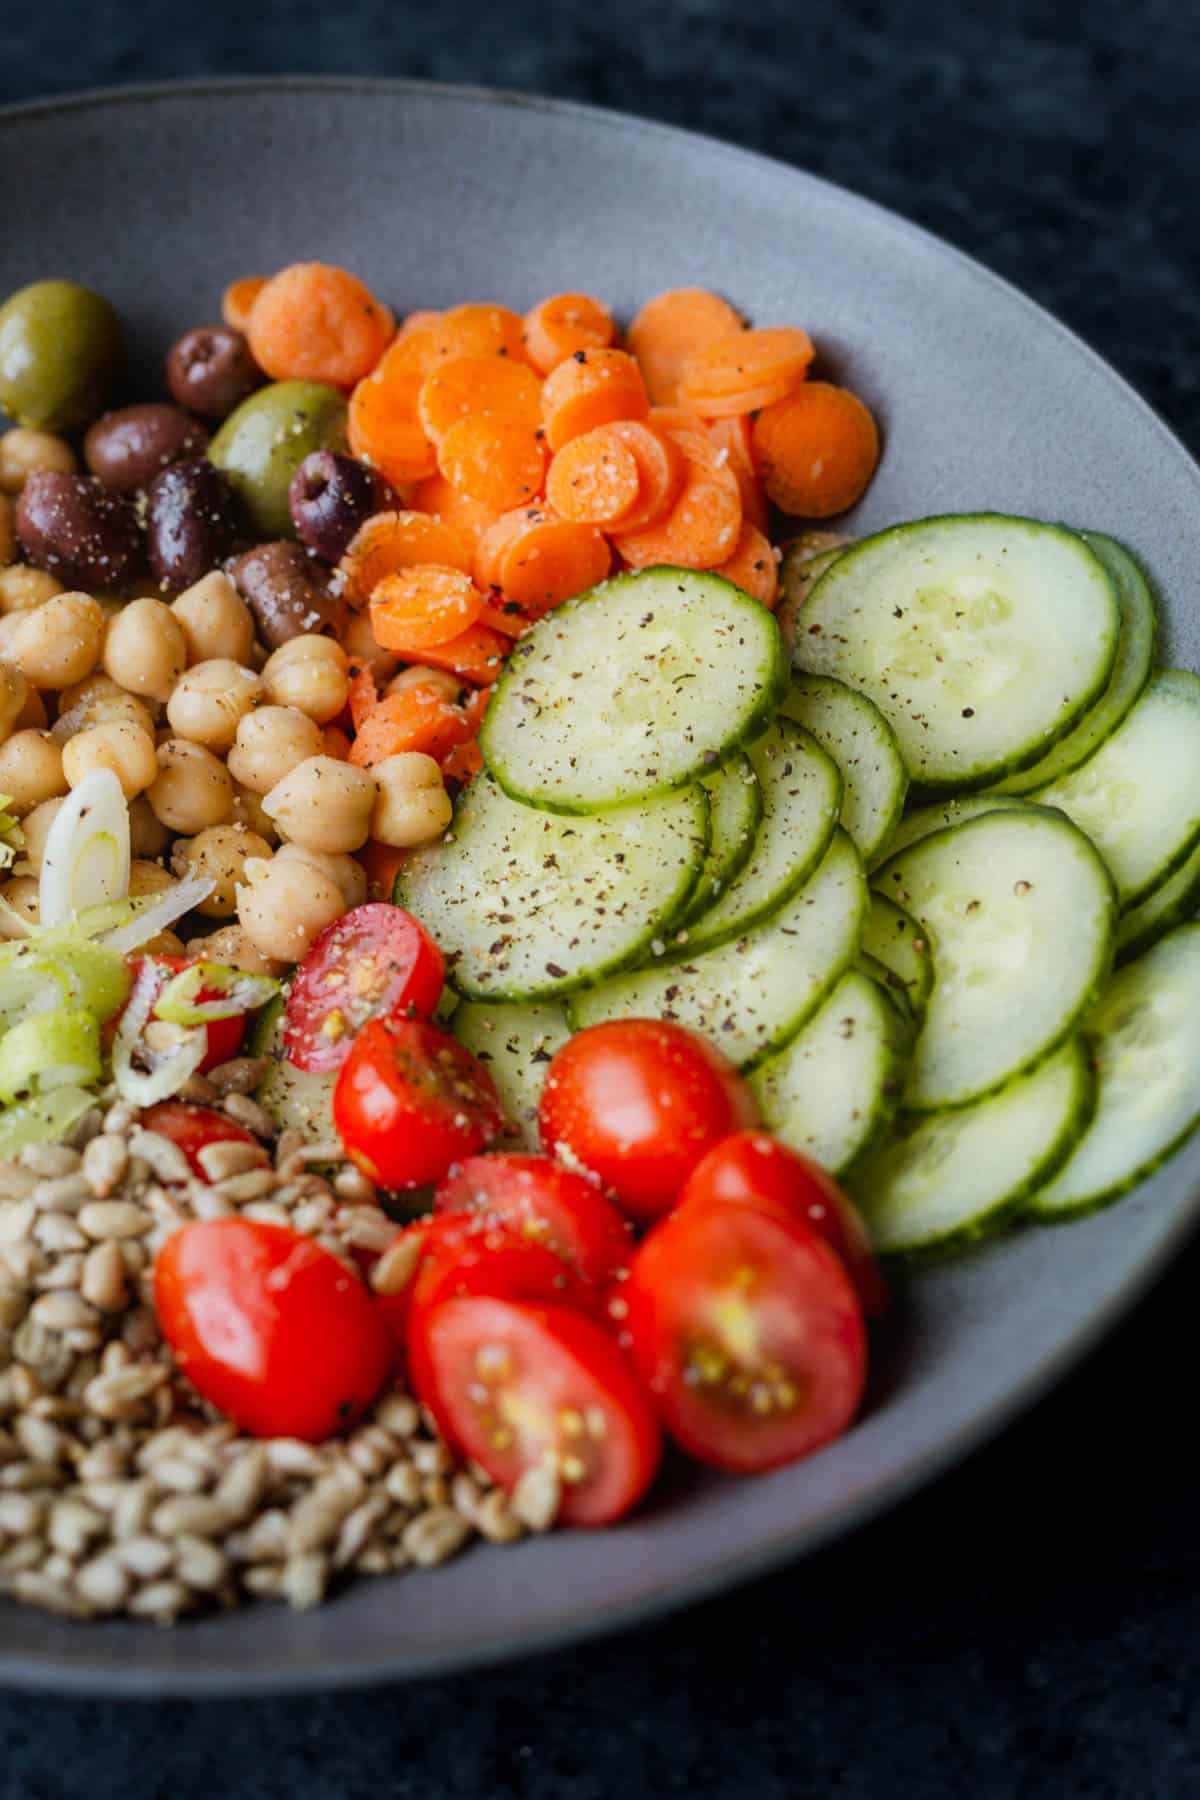 a close-up of a lettuceless salad of cucumbers, tomatoes, sunflower seeds, green onions, chickpeas, olives, and carrots in a dark grey bowl